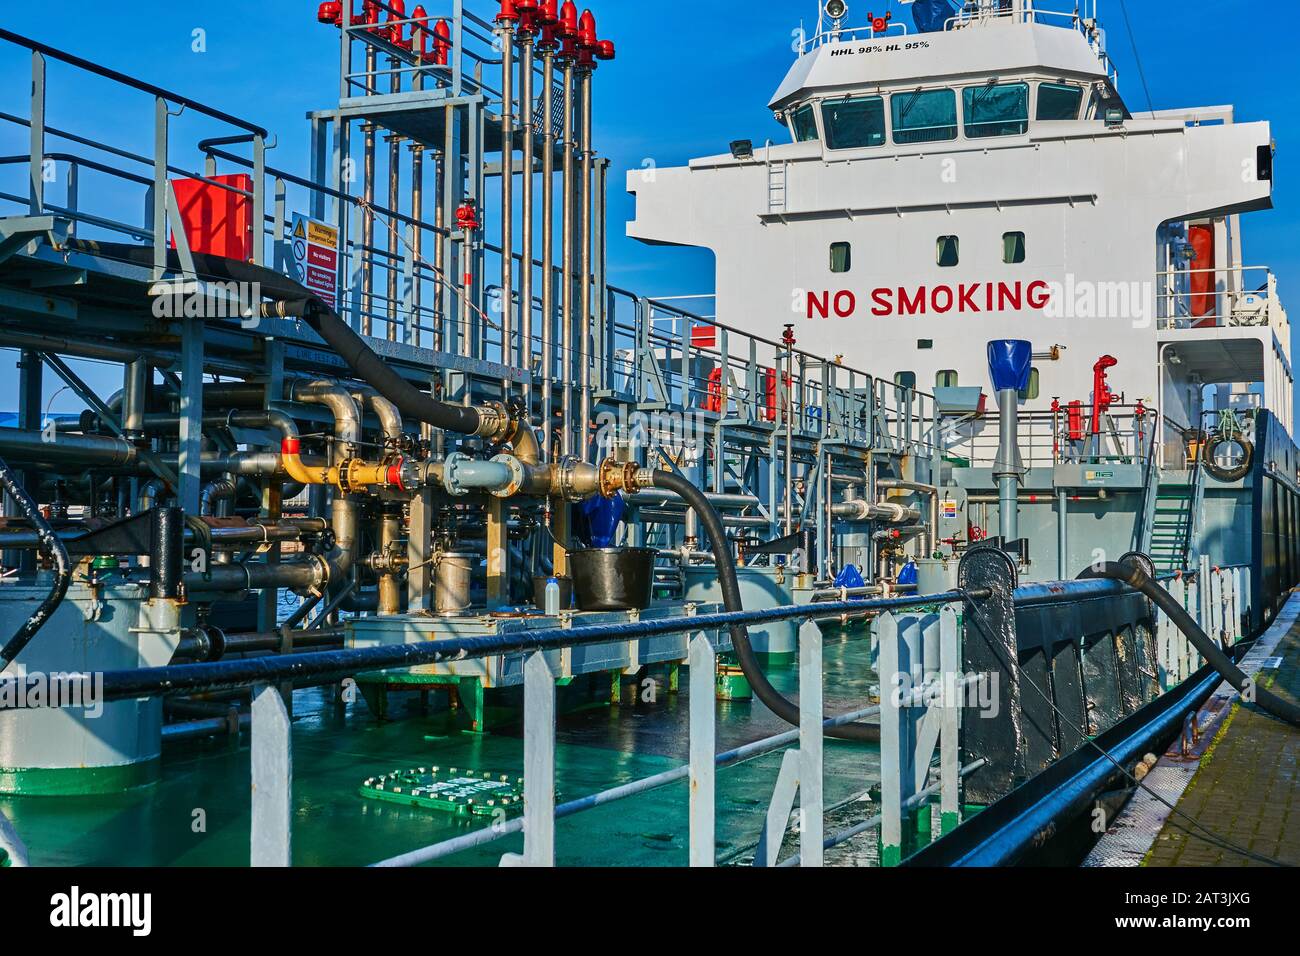 Bremerhaven, Germany, January 16., 2020: Structure and chaotic pipe system of a ship for receiving fossil fuels, with huge notice of the smoking ban a Stock Photo